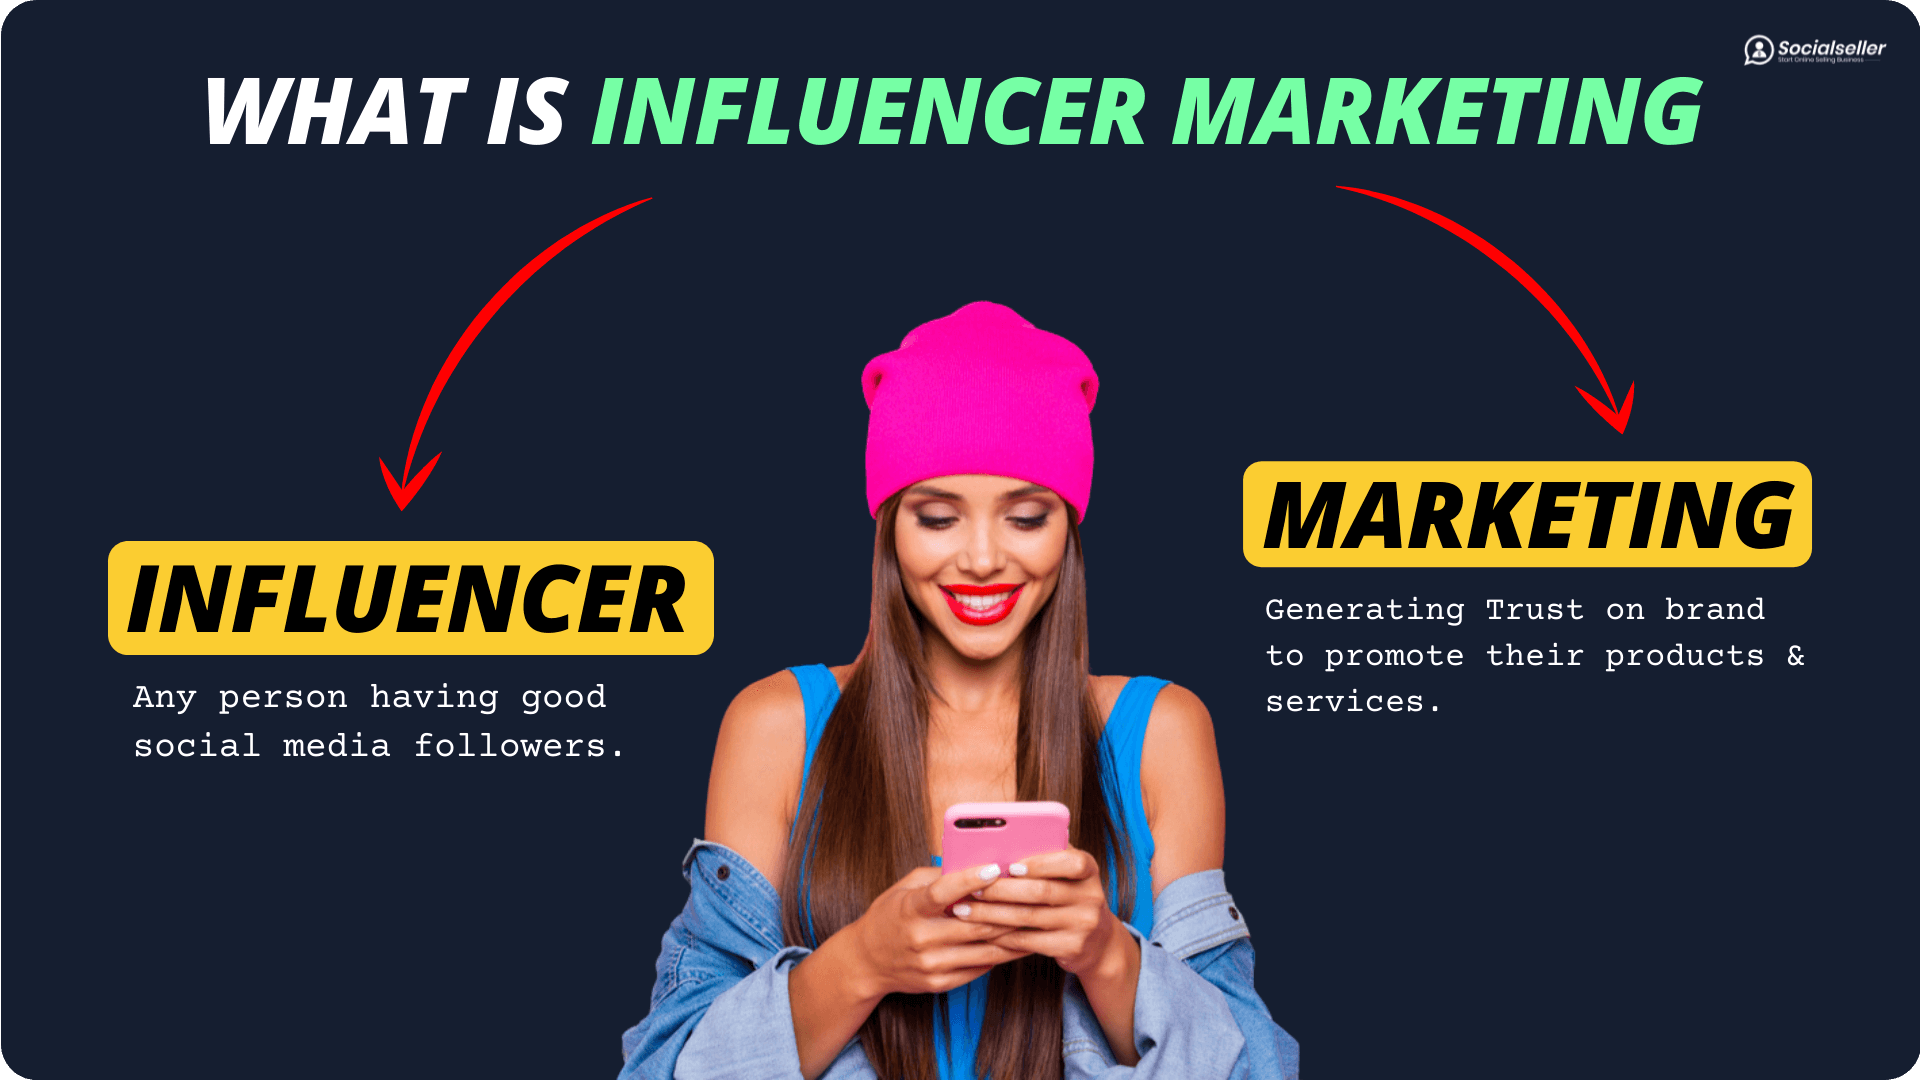 What is Influencer Marketing ?